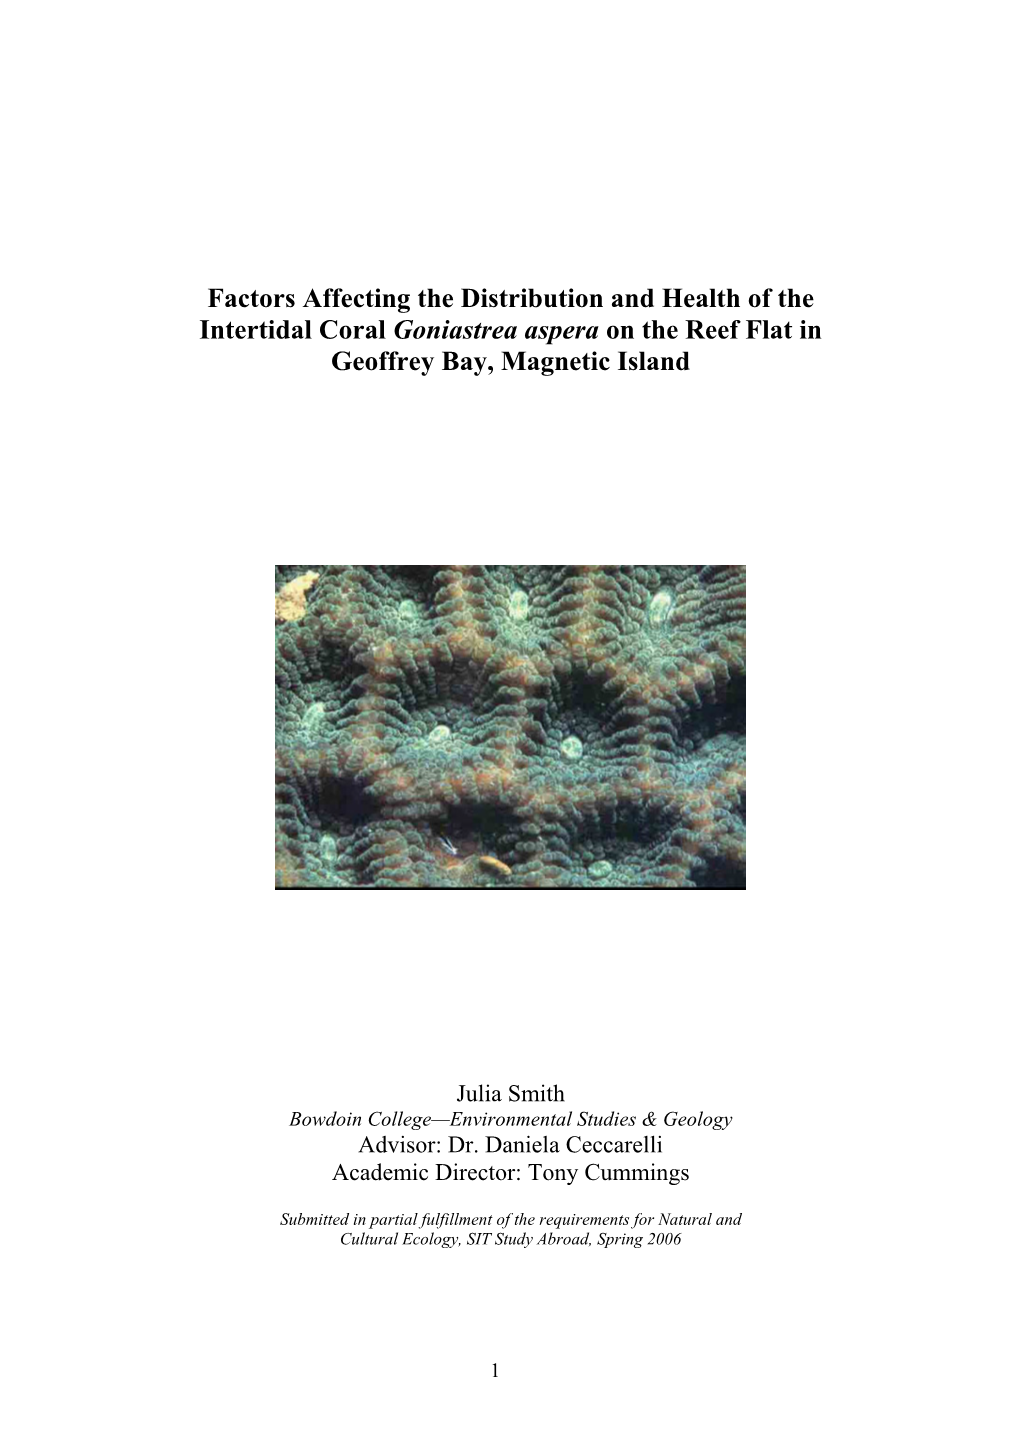 Factors Affecting the Distribution and Health of the Intertidal Coral Goniastrea Aspera on the Reef Flat in Geoffrey Bay, Magnetic Island